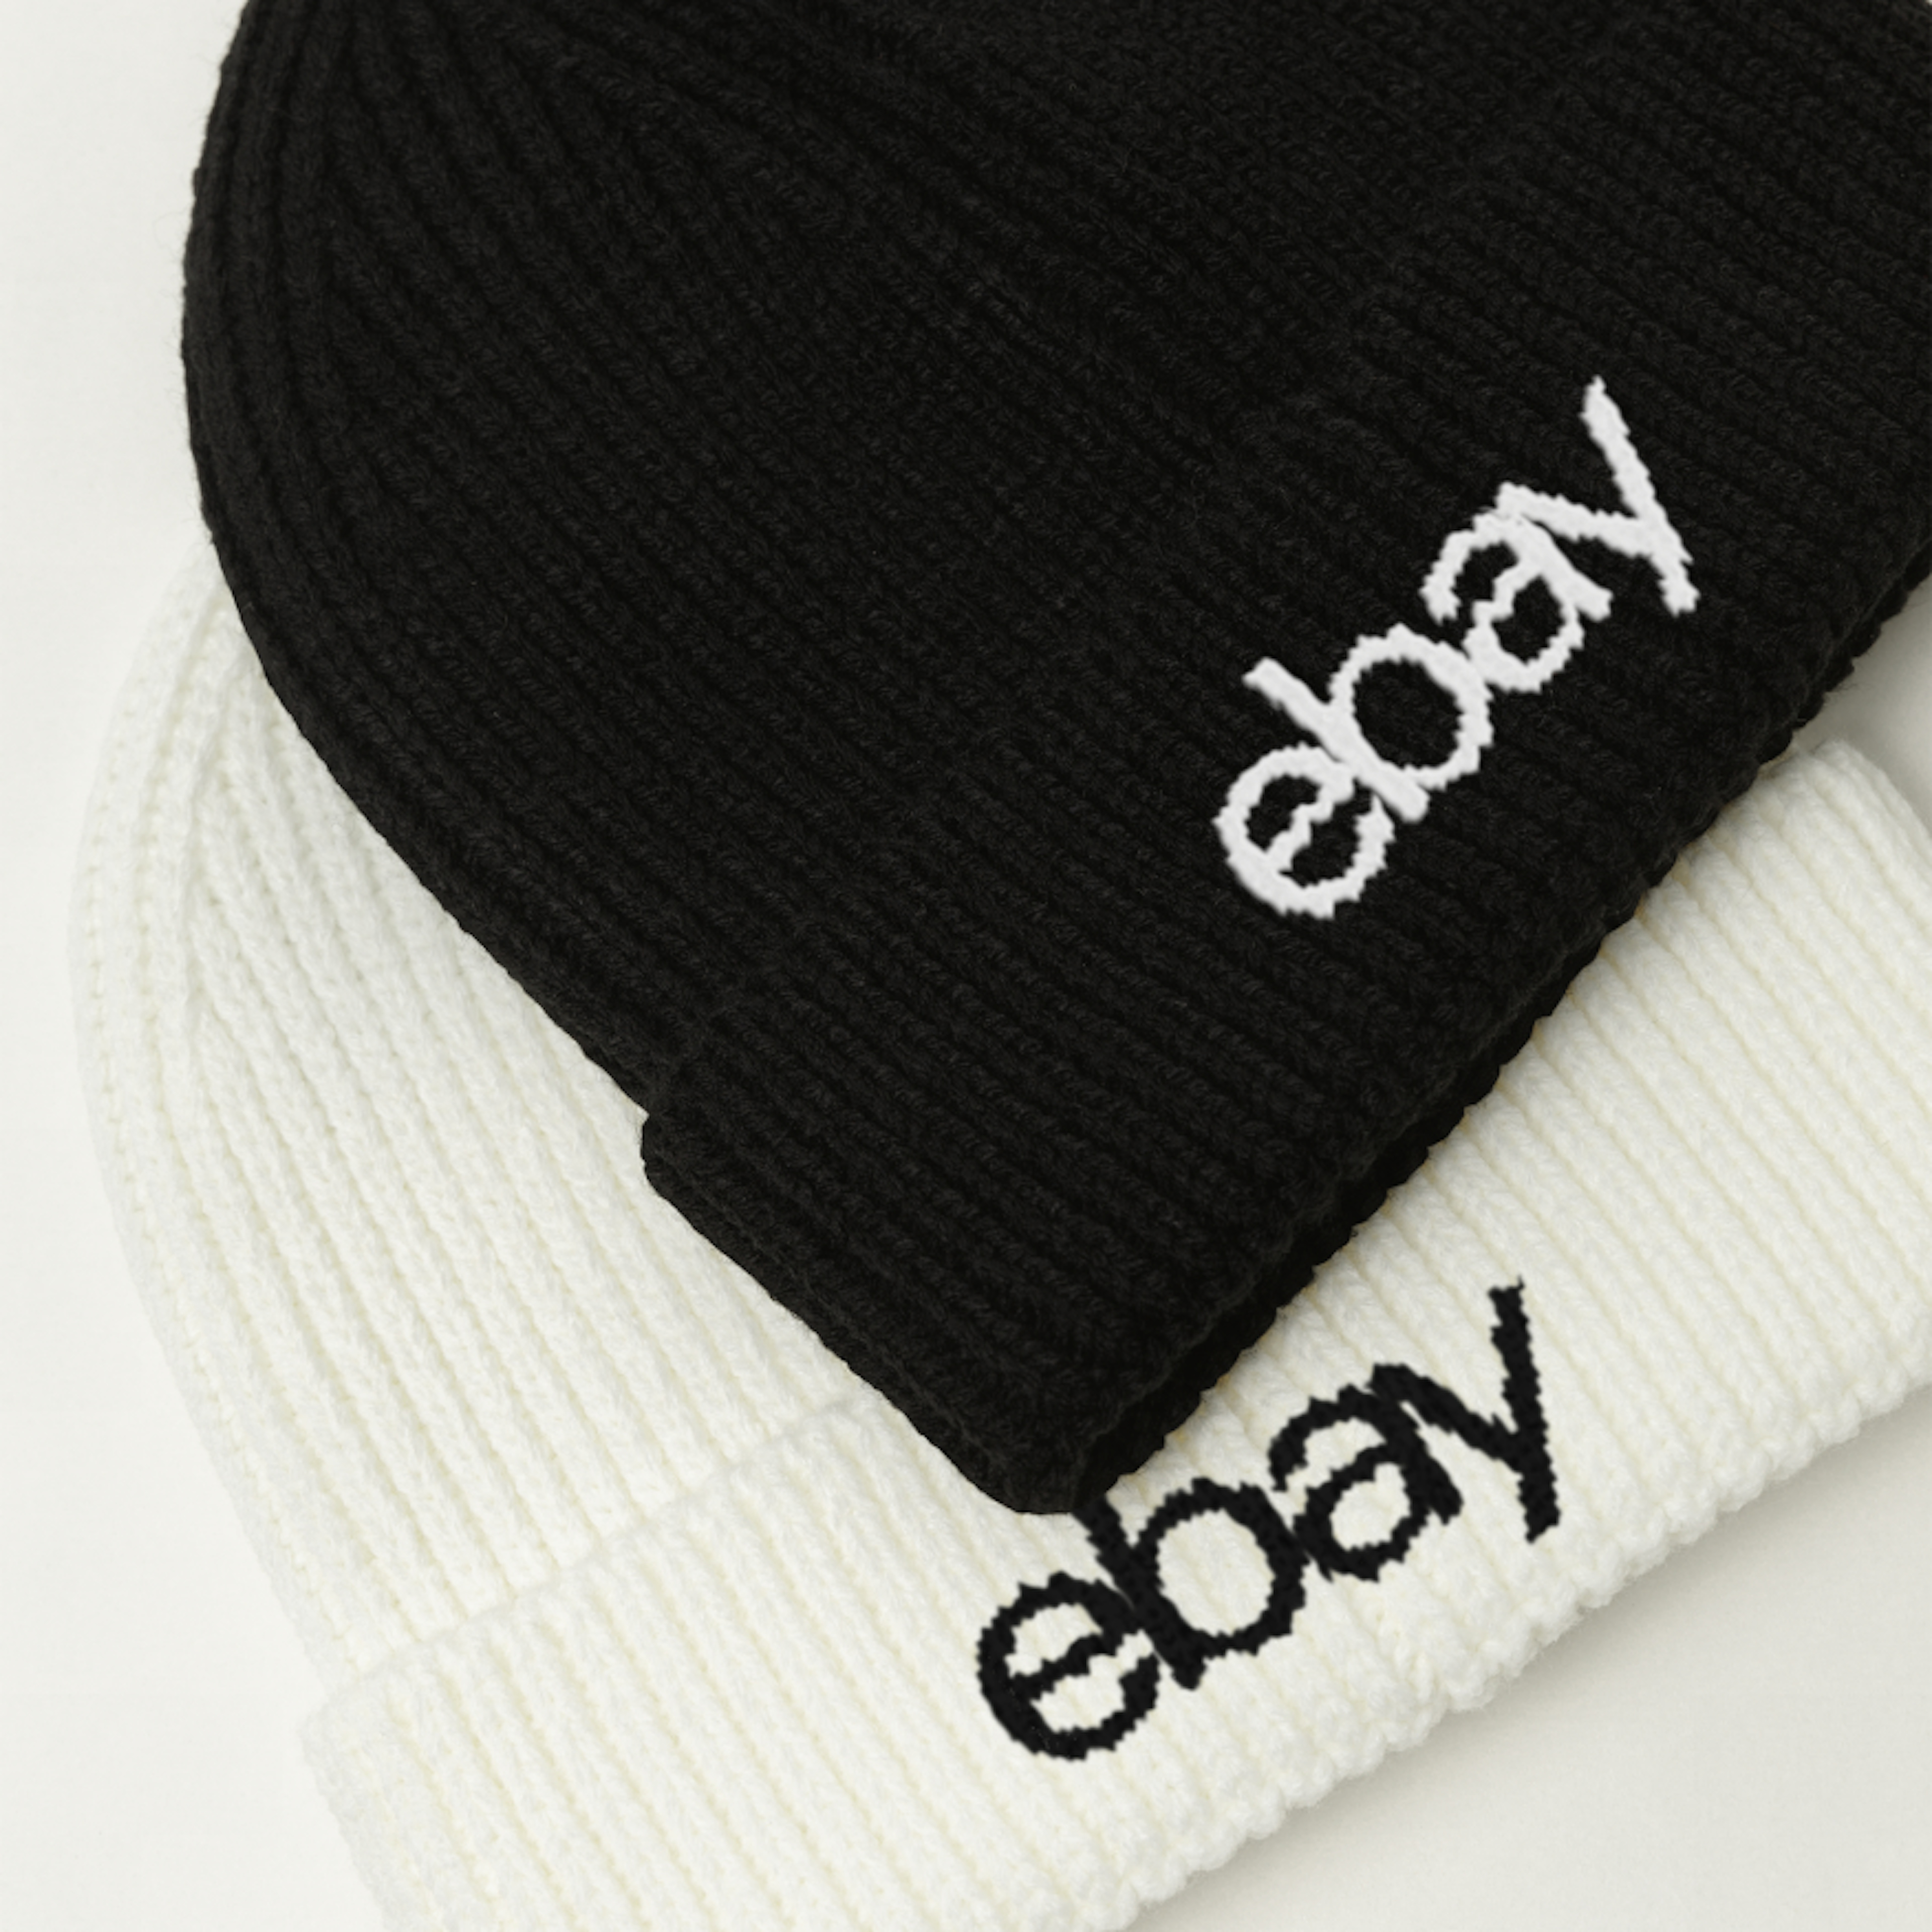 Black and white beanies with logos embroidered on them. The black beanie has a white logo, and the white beanie has a black logo.